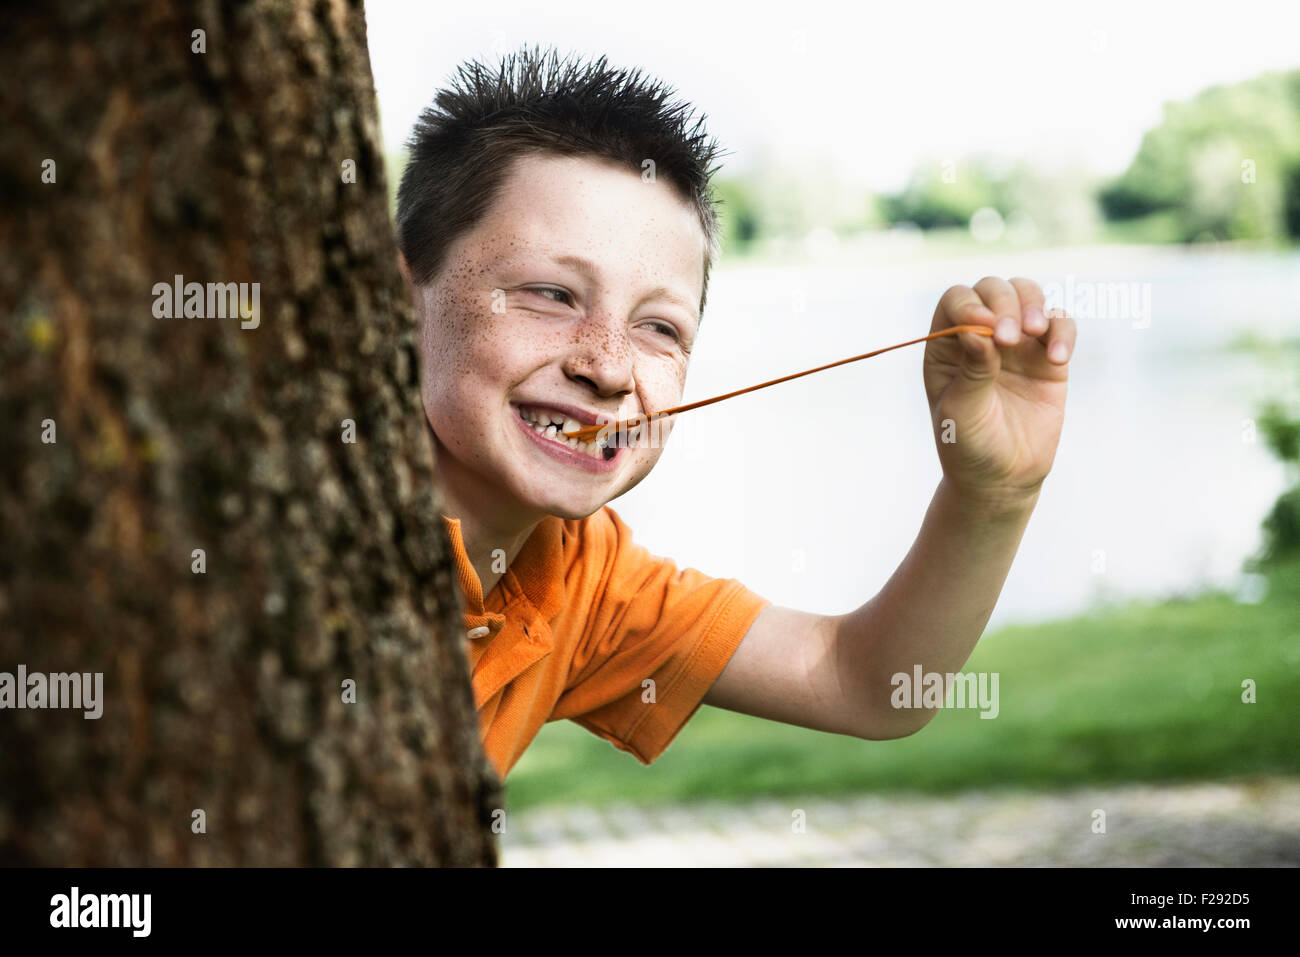 Boy pulling bubble gum and peeking out from behind a tree, Bavaria, Germany Stock Photo